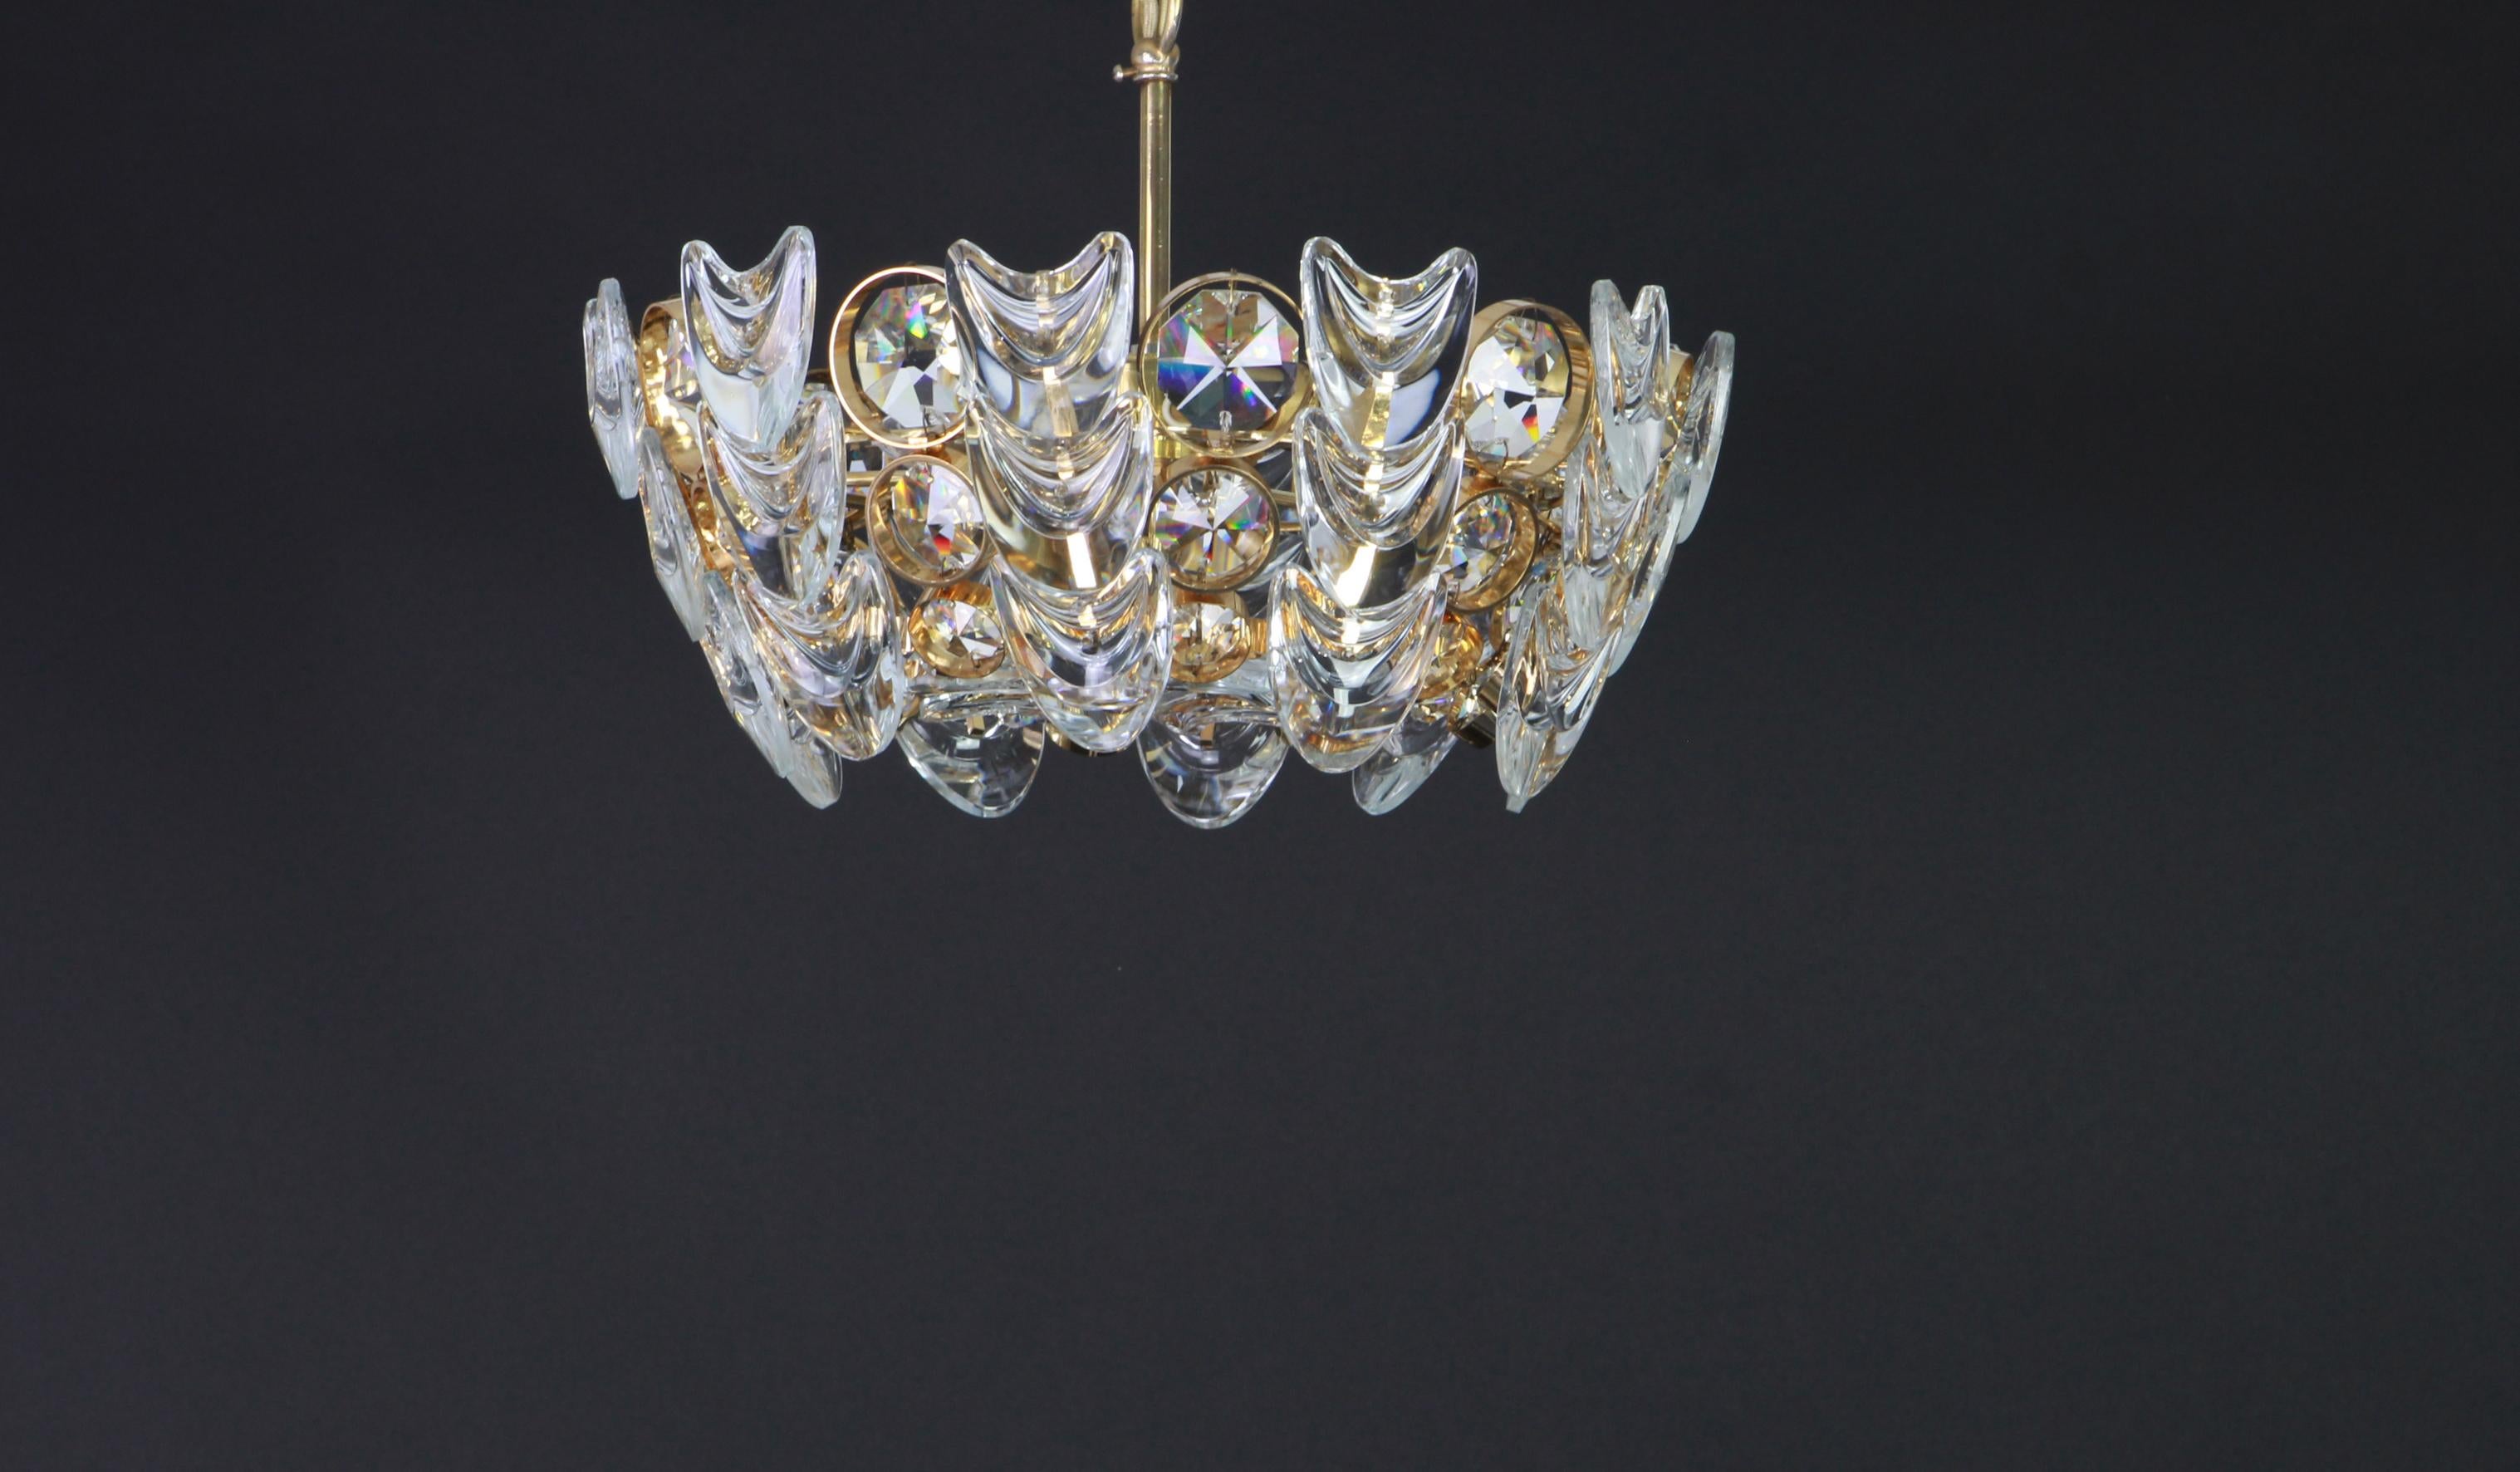 Gold Plate Petite Gilt Brass and Crystal Glass Encrusted Chandelier by Palwa, Germany 1970s For Sale